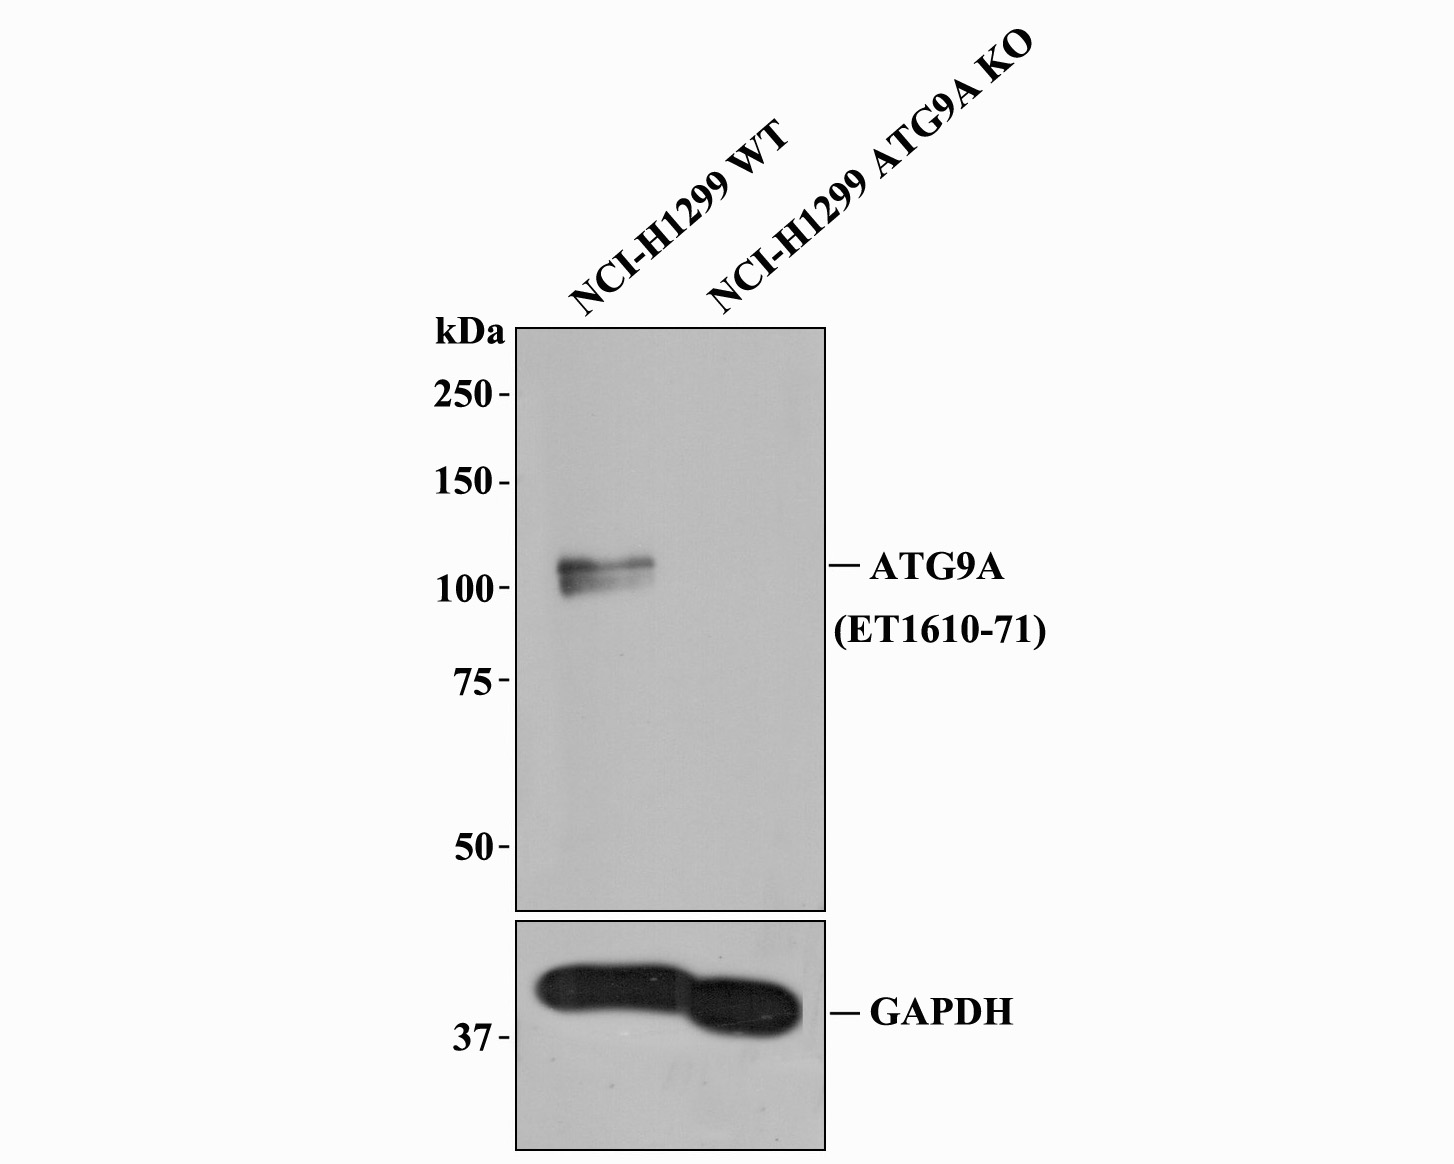 All lanes: Western blot analysis of ATG9A with anti-ATG9A antibody [SC67-05] (ET1610-71) at 1:1,000 dilution.<br />
Lane 1: Wild-type NCI-H1299 whole cell lysate (20 µg).<br />
Lane 2: ATG9A knockout NCI-H1299 whole cell lysate (20 µg).<br />
<br />
ET1610-71 was shown to specifically react with ATG9A in wild-type NCI-H1299 cells. No band was observed when ATG9A knockout sample was tested. Wild-type and ATG9A knockout samples were subjected to SDS-PAGE. Proteins were transferred to a PVDF membrane and blocked with 5% NFDM in TBST for 1 hour at room temperature. The primary antibody (ET1610-71, 1/1,000) and Loading control antibody (Rabbit anti-GAPDH , ET1601-4, 1/10,000) was used in 5% BSA at room temperature for 2 hours. Goat Anti-Rabbit IgG-HRP Secondary Antibody (HA1001) at 1:200,000 dilution was used for 1 hour at room temperature.